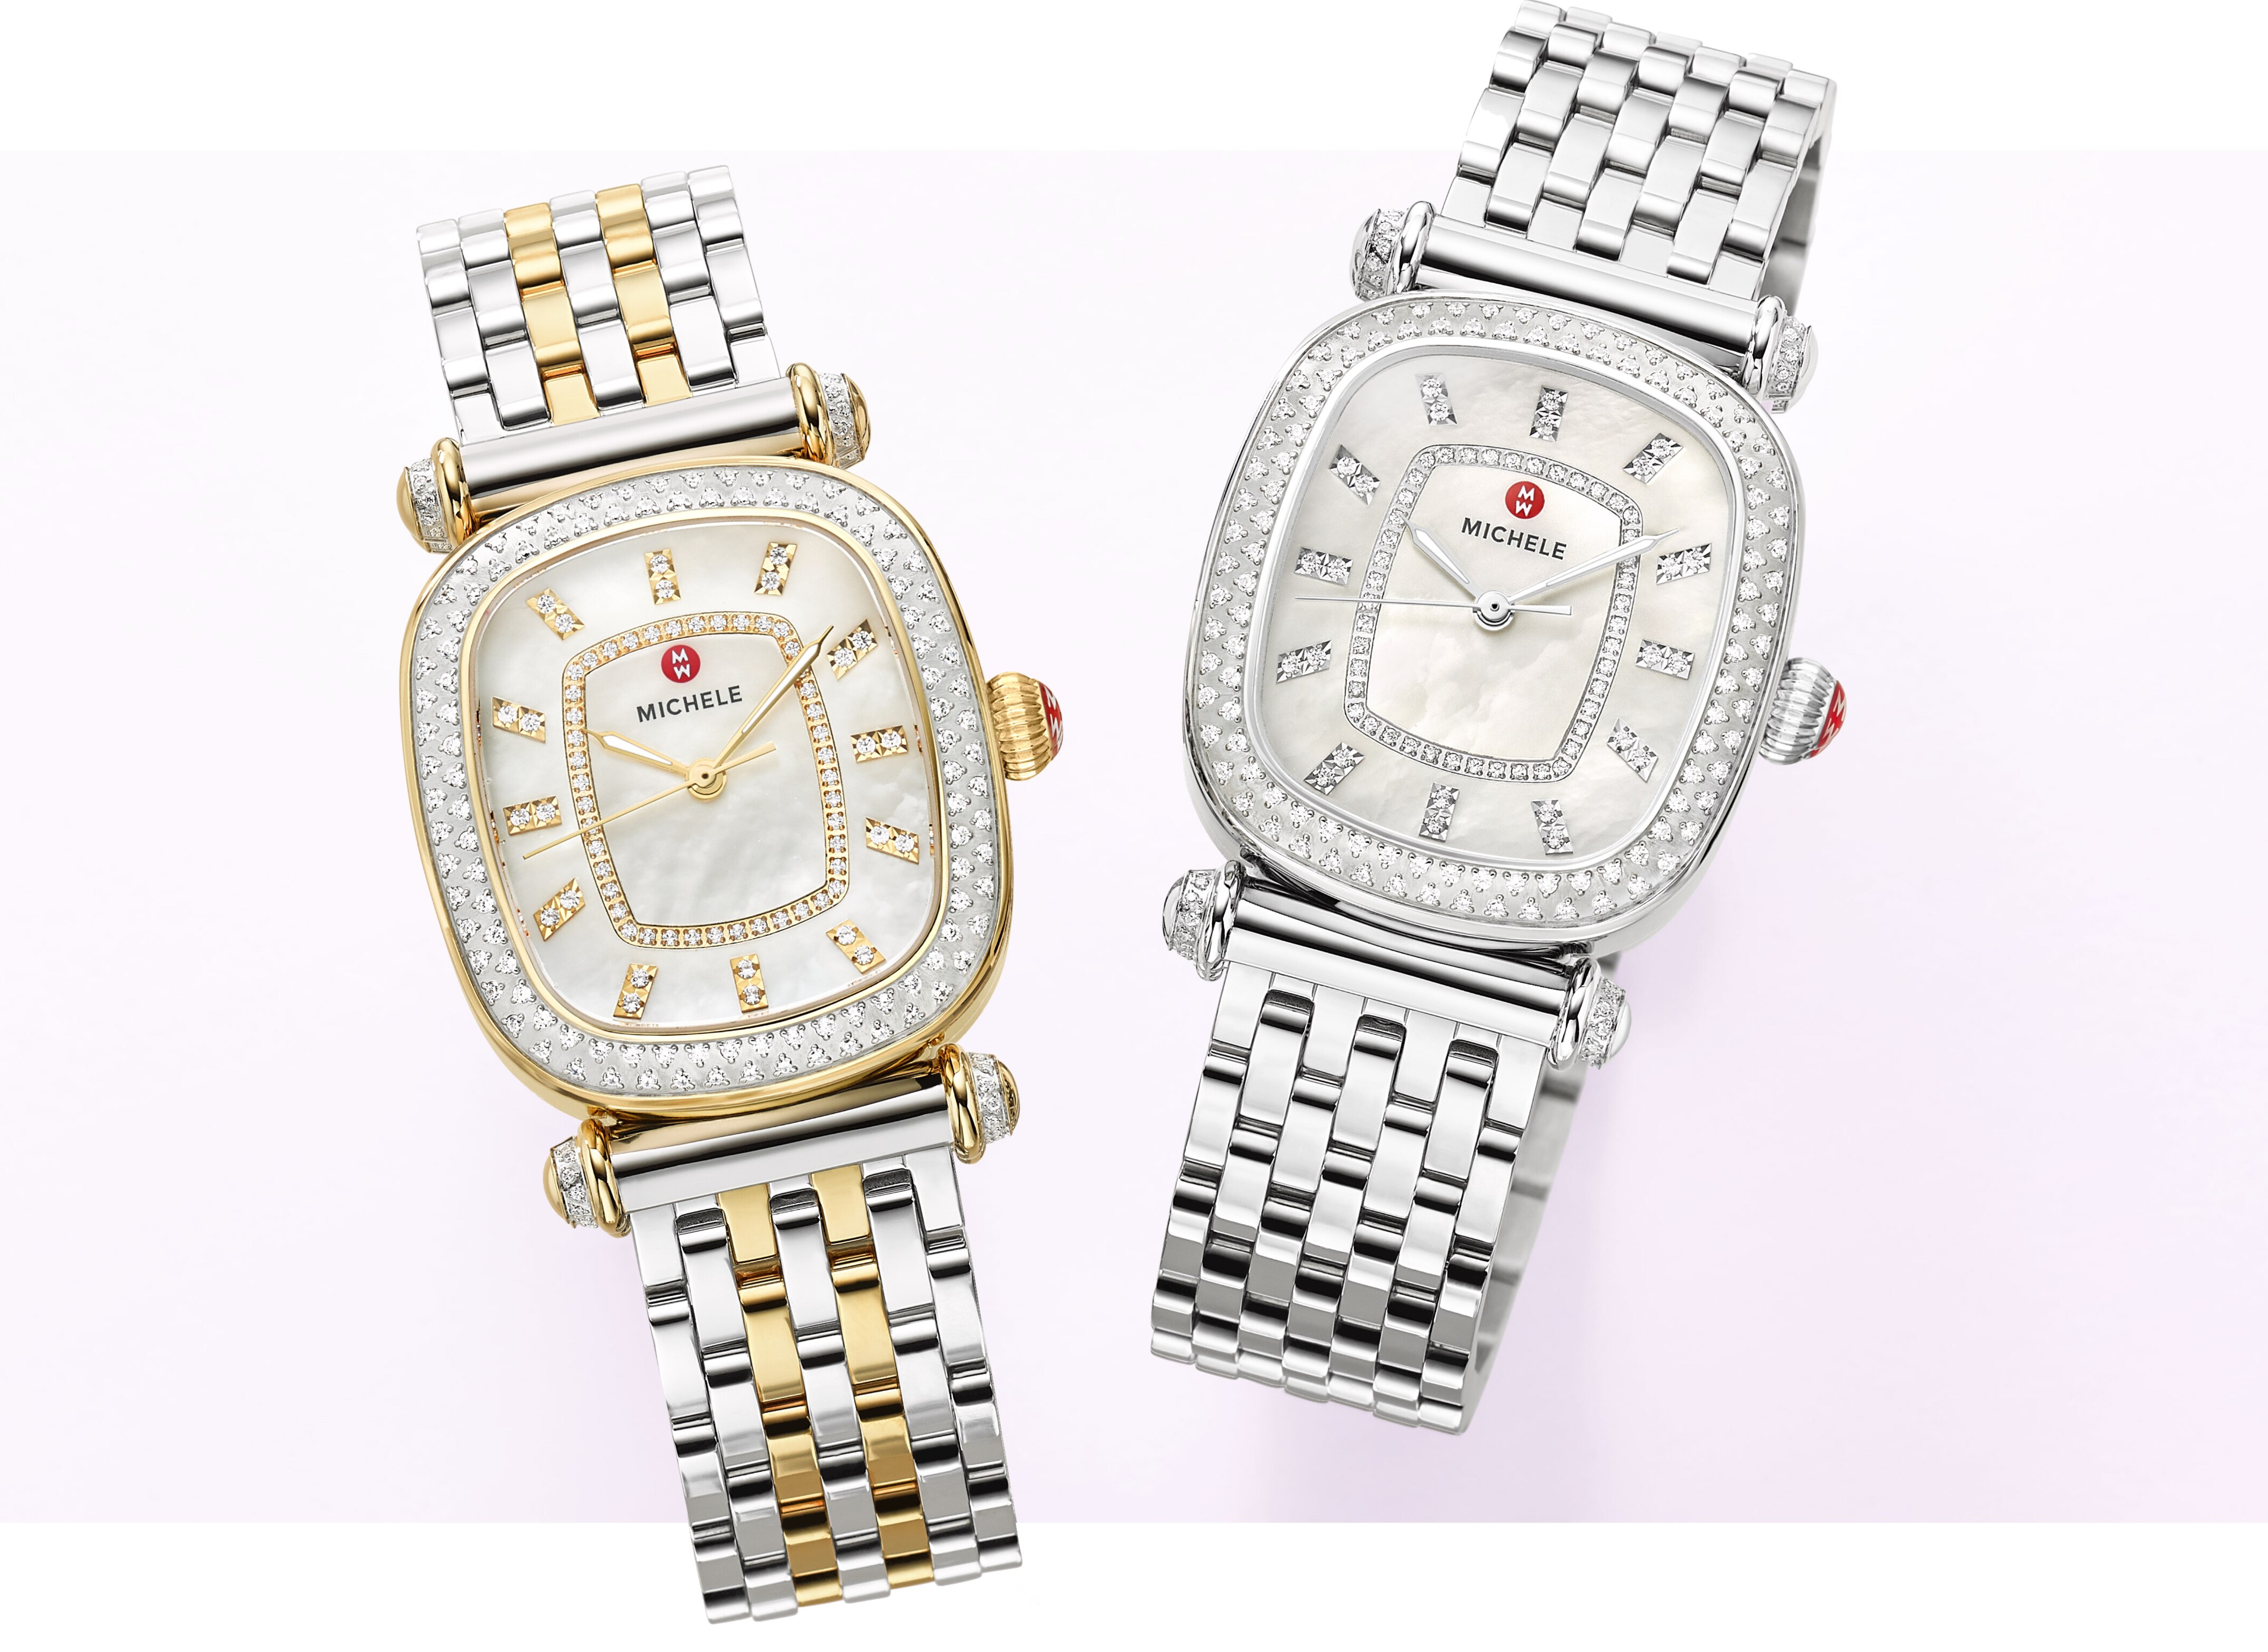 Two-tone stainless and 18K gold-tone Caber Isle and stainless Caber Isle watches featuring cushion-shaped case, diamond-covered bezel and t-bar lugs.